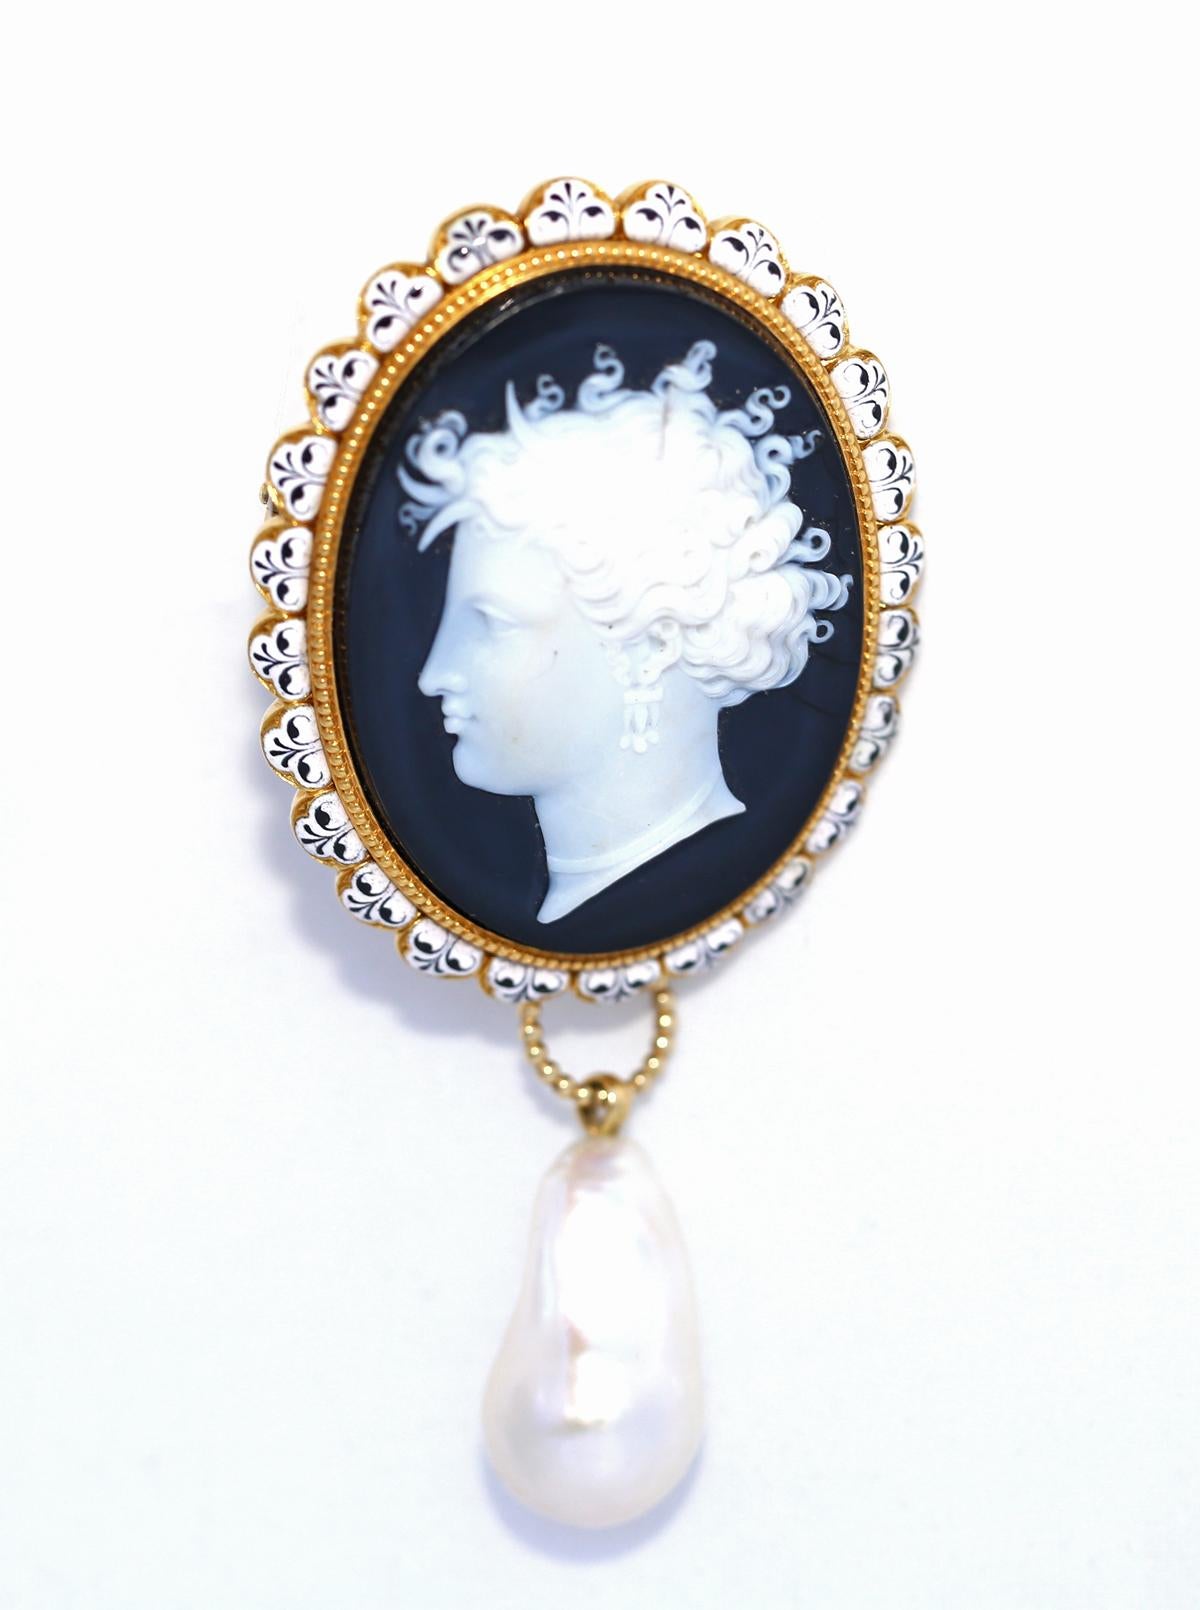 Edwardian Cameo Pearl Brooch Yellow Gold Greek Paul-Victor Lebas. Created around 1910.

Edwardian Cameo Pearl Brooch Yellow Gold. By Paul-Victor Lebas. Marvelous and massive antique cameo brooch, depicting a curly lady. Typical ancient Greek